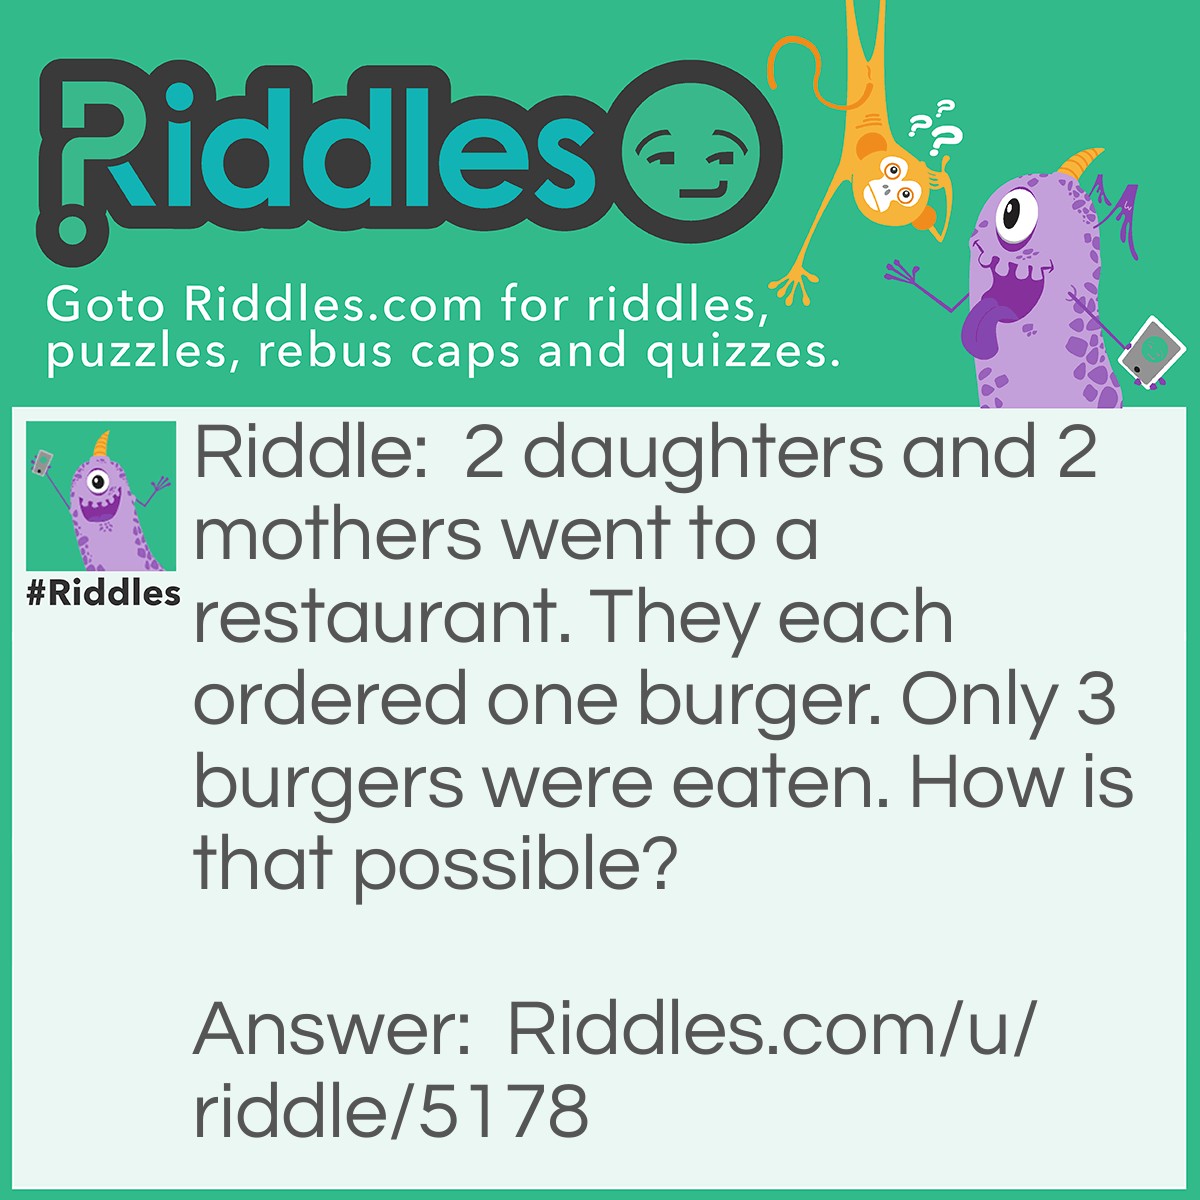 Riddle: 2 daughters and 2 mothers went to a restaurant. They each ordered one burger. Only 3 burgers were eaten. How is that possible? Answer: One of them was a grandmother. The other mother and one daughter is the mom. The daughter is the daughter of the mom.